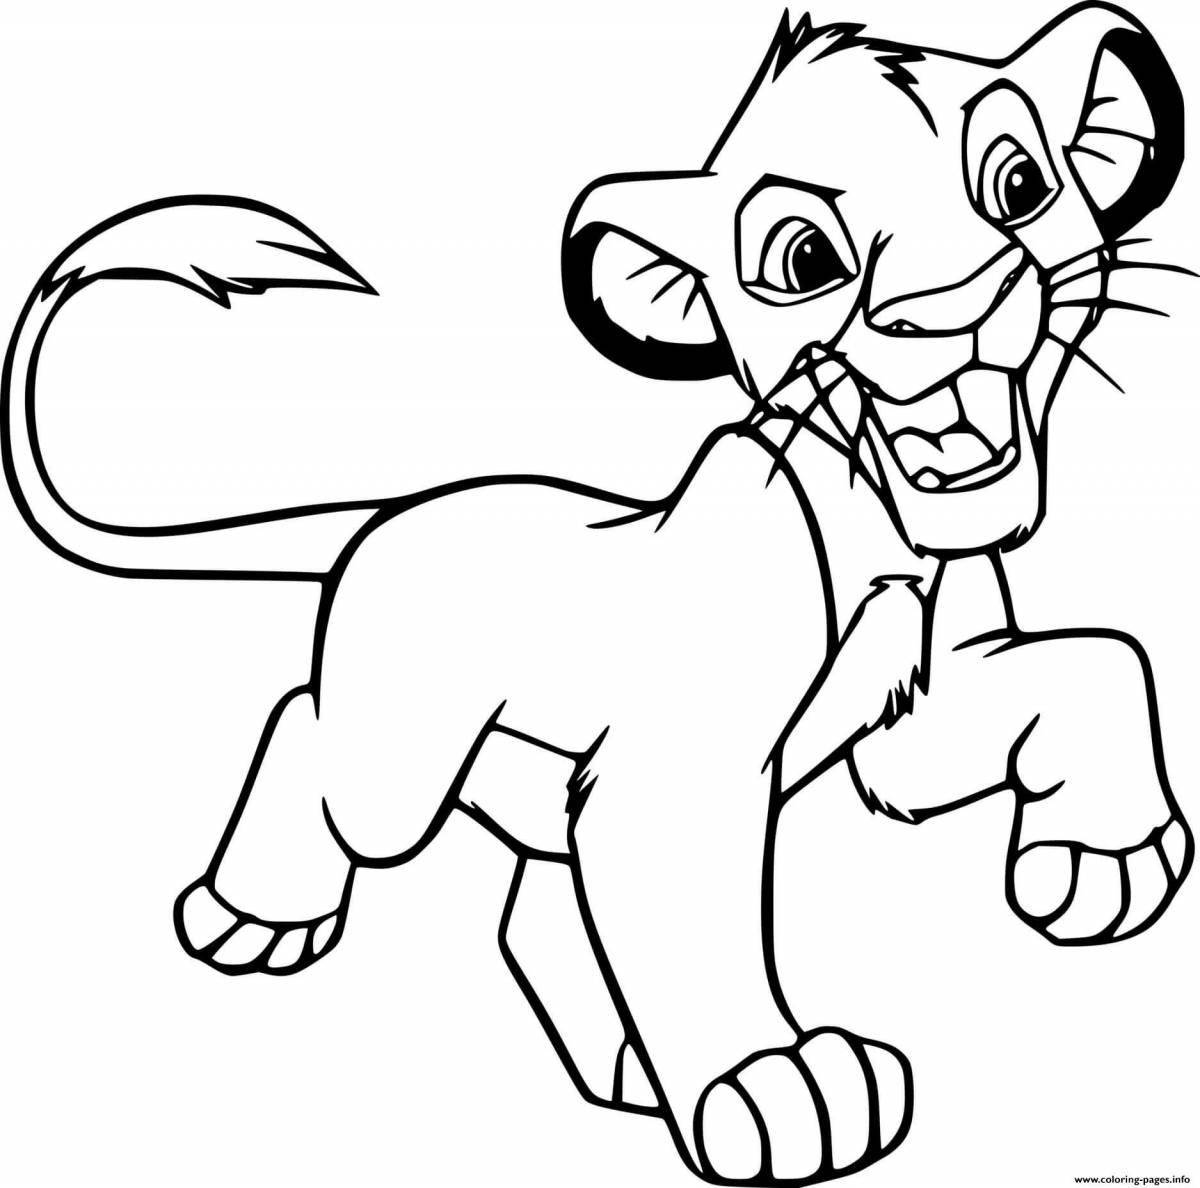 Playful lion king coloring page for kids